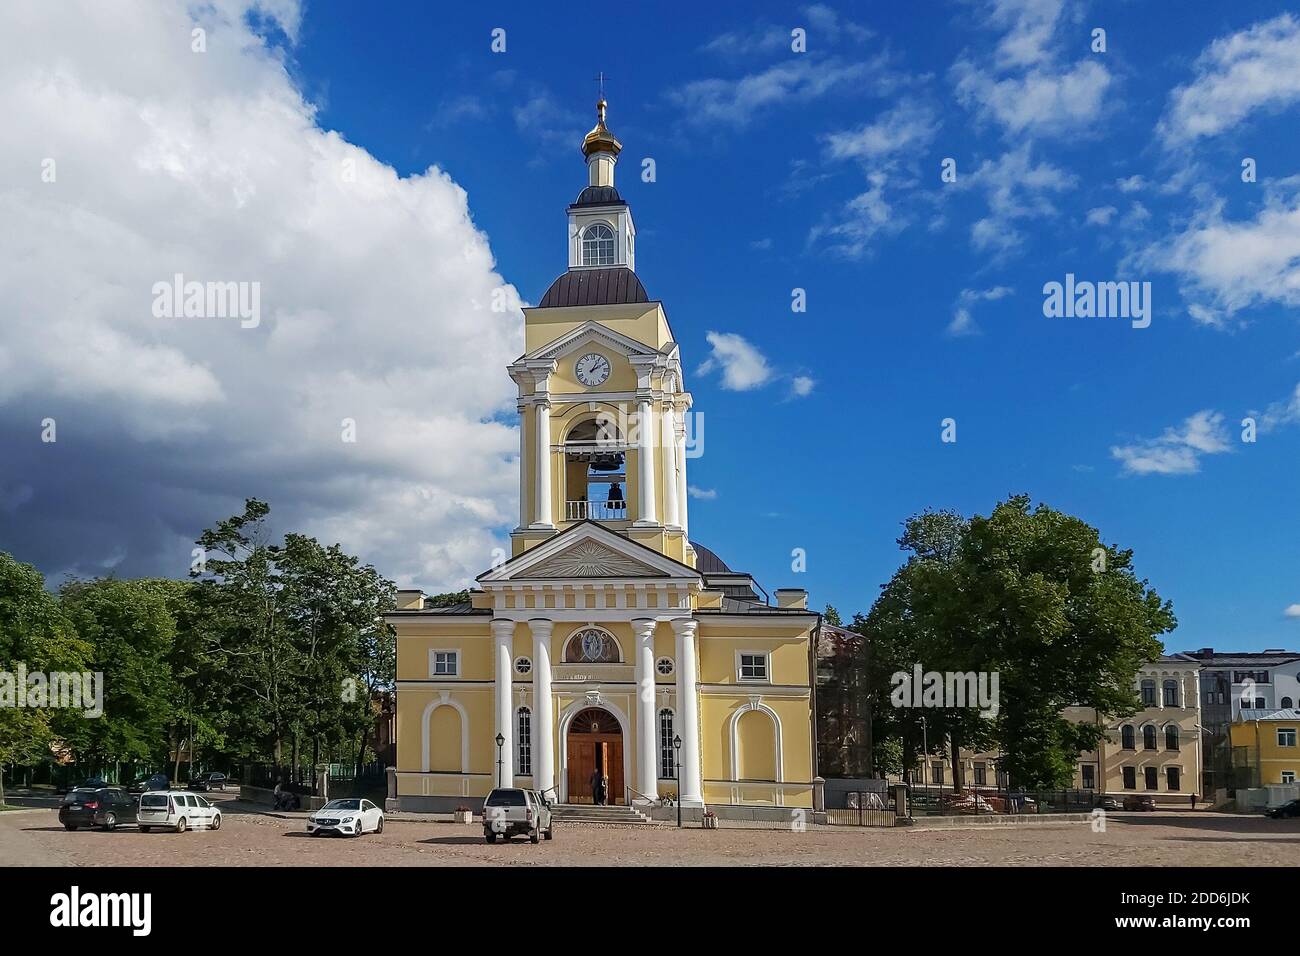 Vyborg, Russia, August 26: View of the Spaso-Preobrazhensky Cathedral on Cathedral square against the blue sky in the city of Vyborg, August 26, 2020. Stock Photo